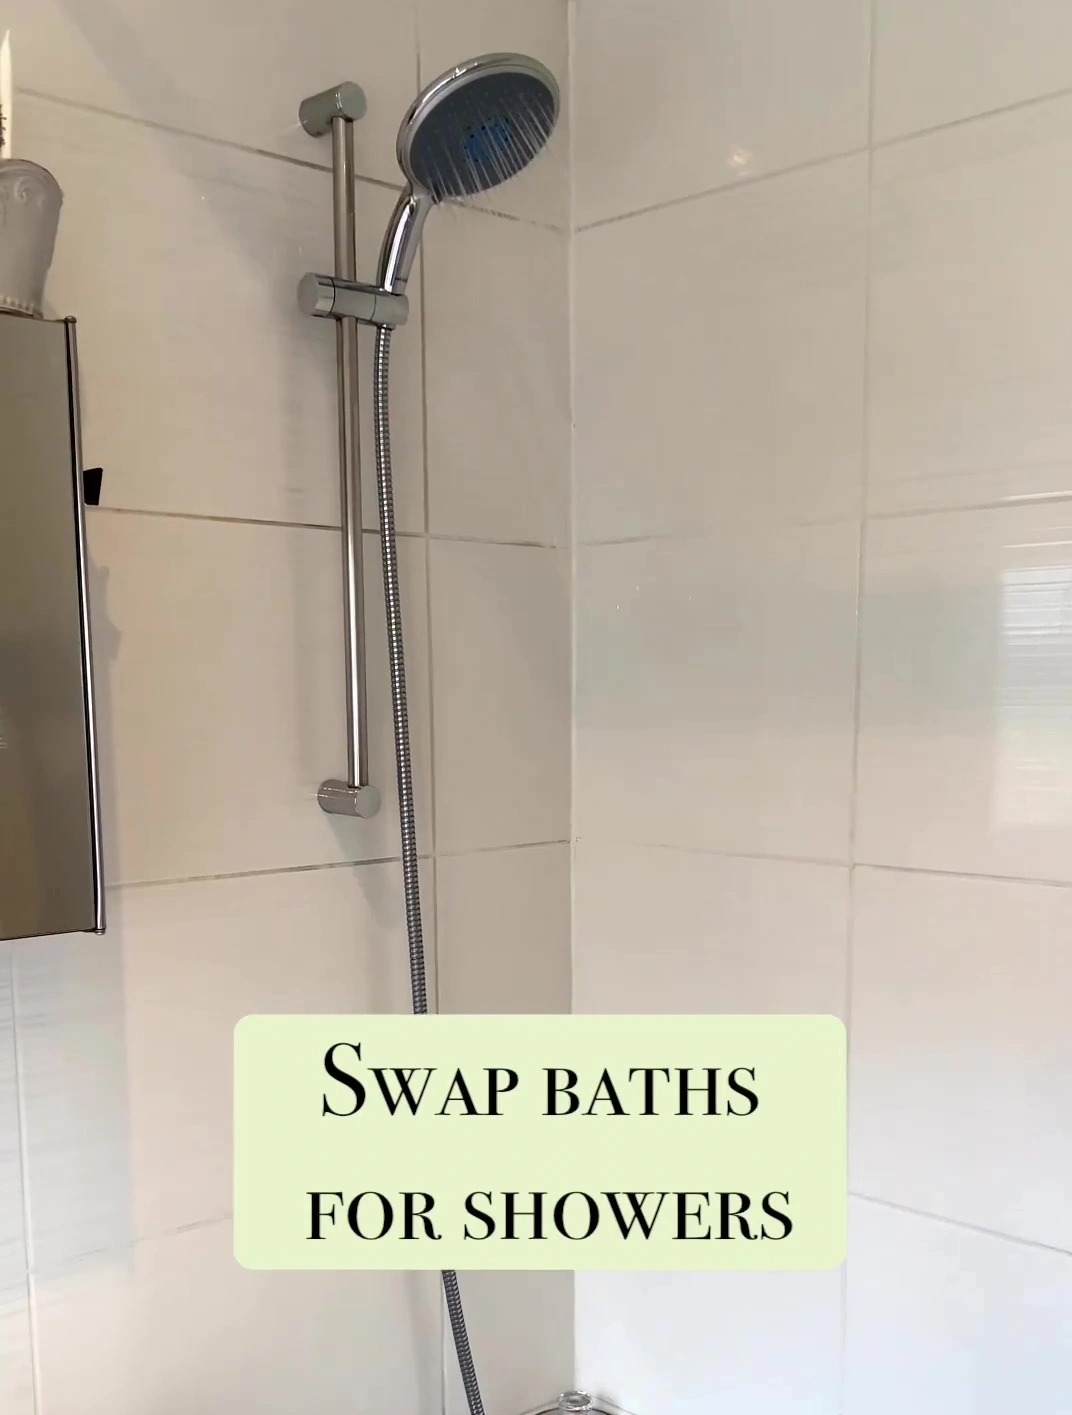 By swapping baths for showers you could potentially save up to £12 a year